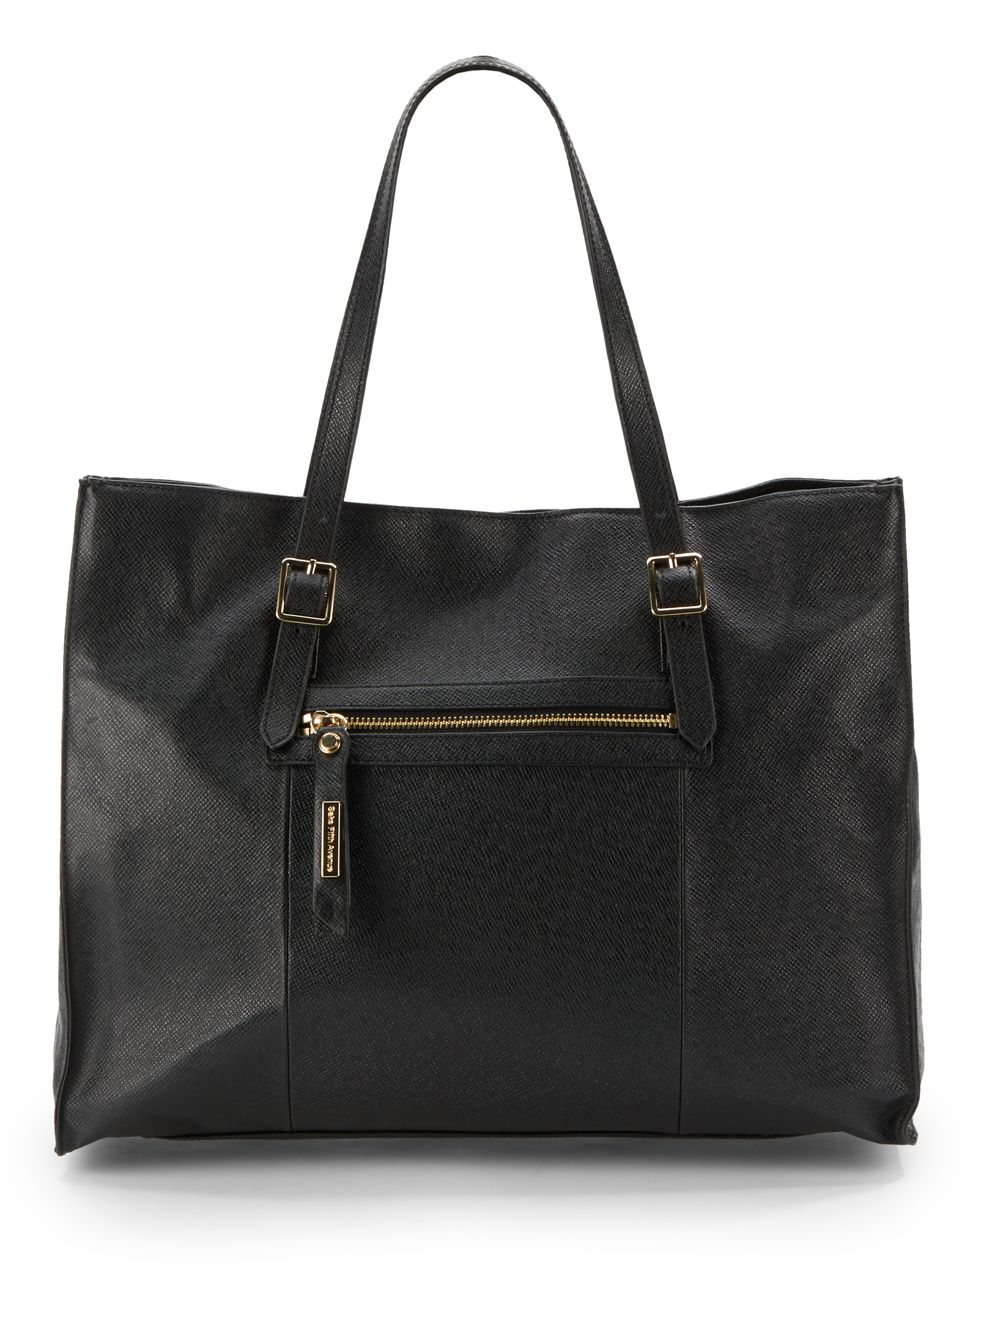 Saks Fifth Avenue Black Large Saffiano Leather Tote Bag in Black - Lyst